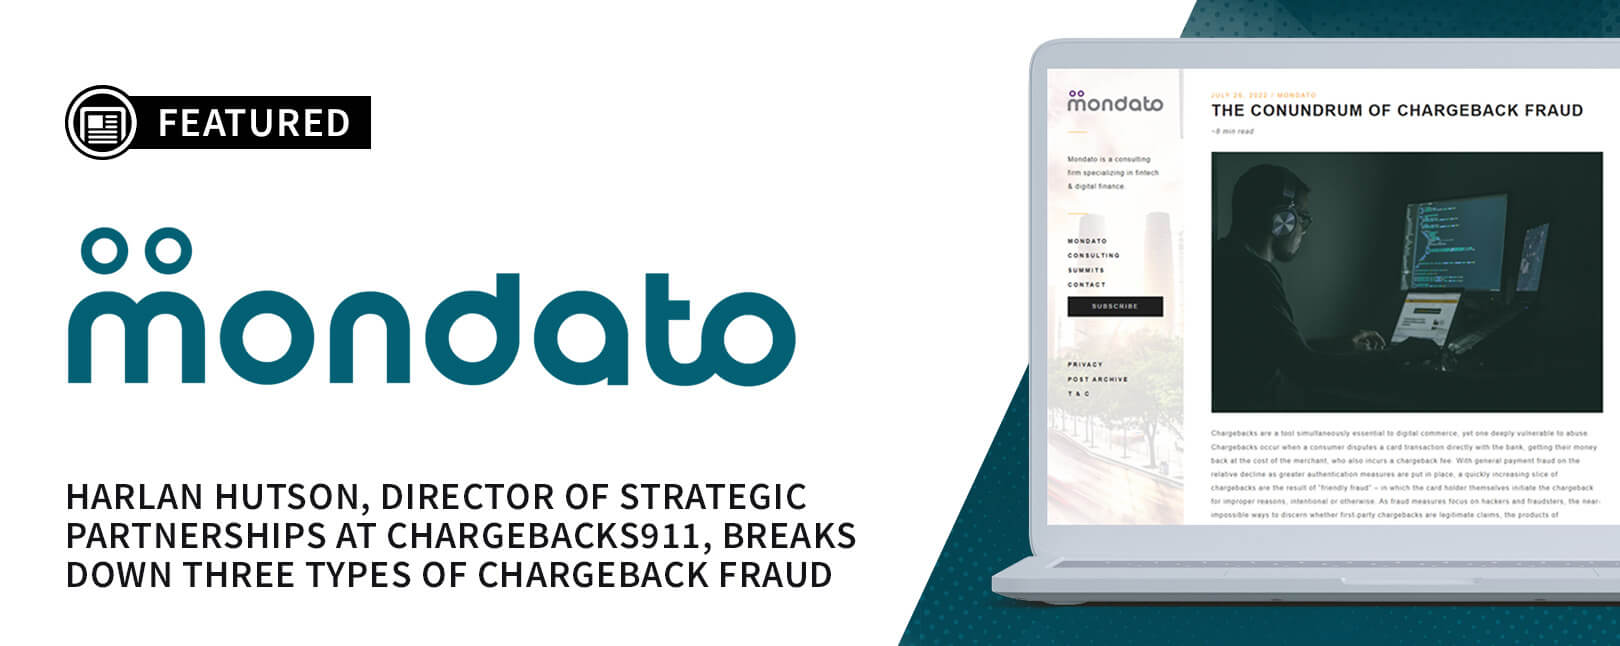 Chargebacks911® Field Report Featured on Mondato Insight Blog